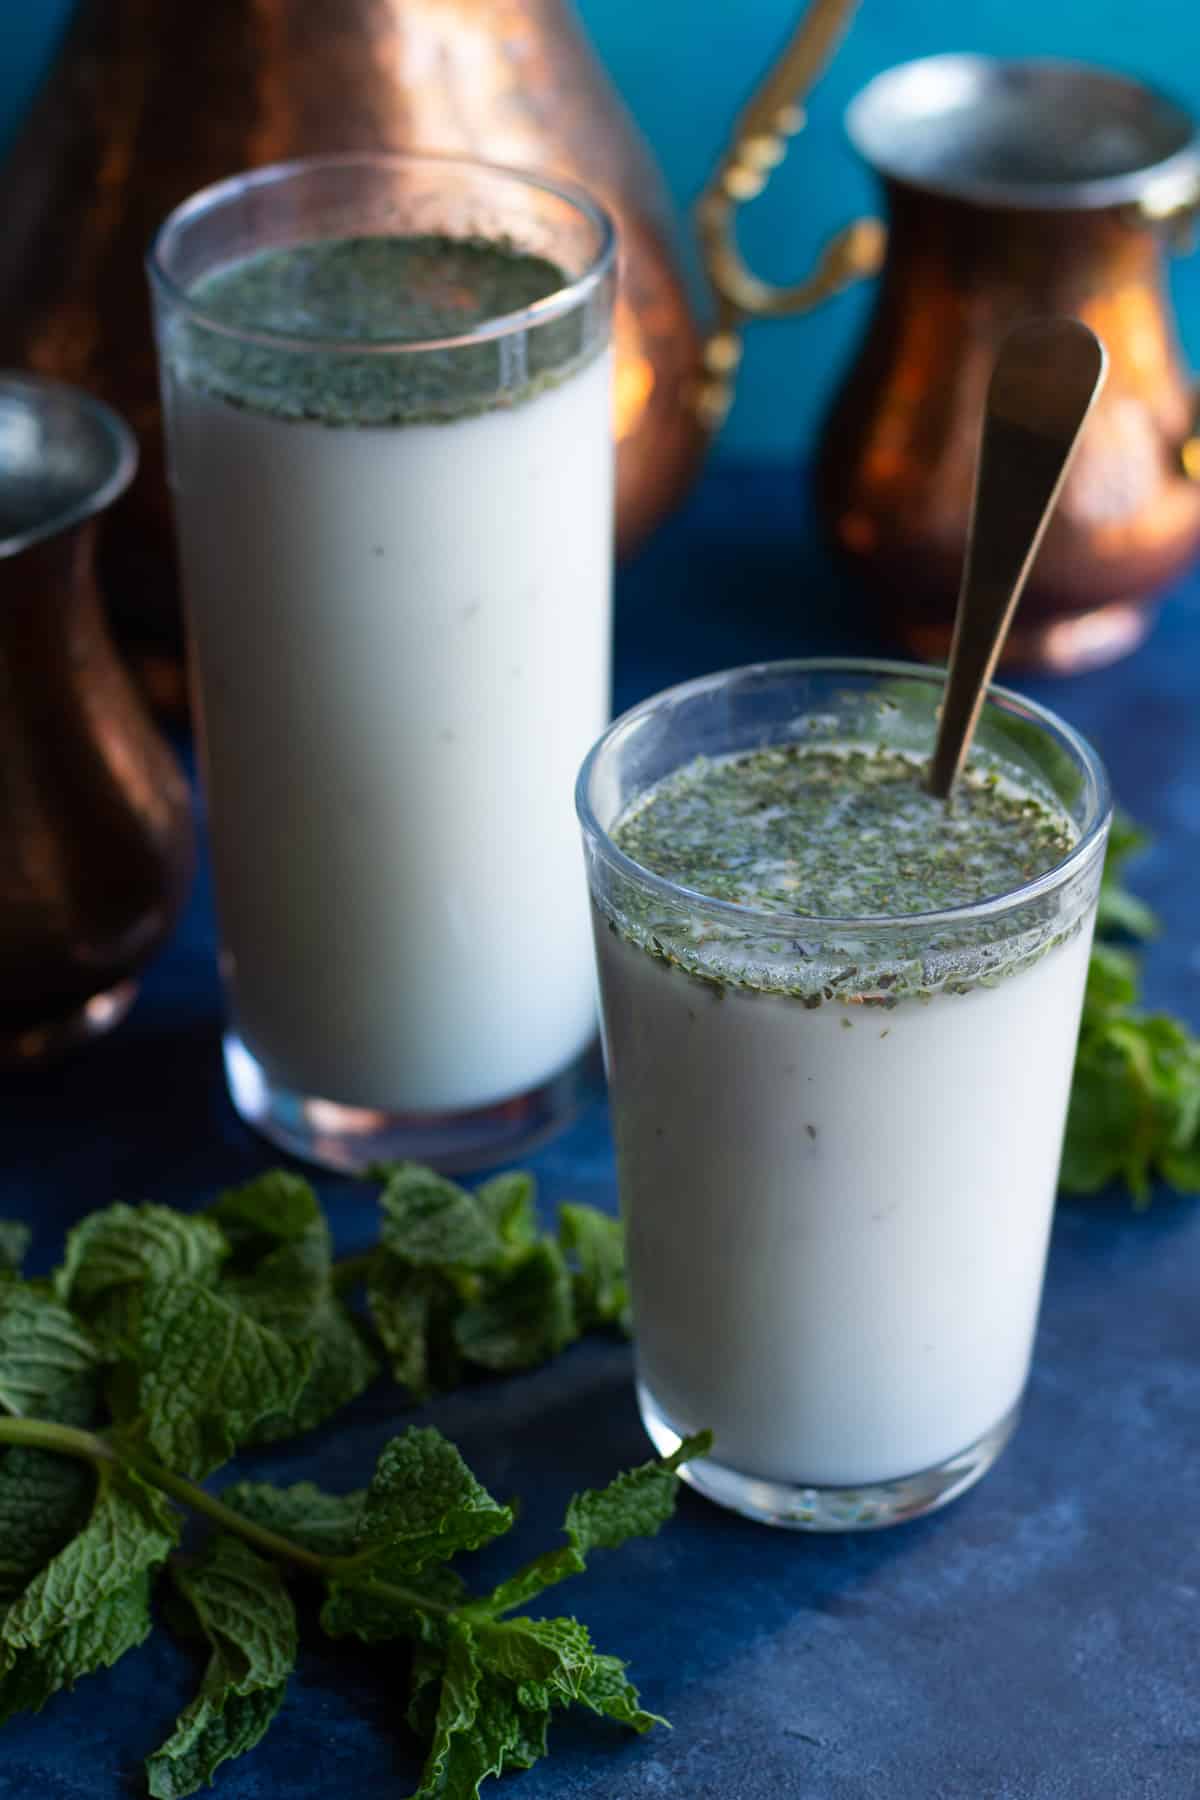 Ayran or doogh is a savory yogurt drink that's made with only three ingredients. This refreshing drink is served with main dishes and is great for hydration. 